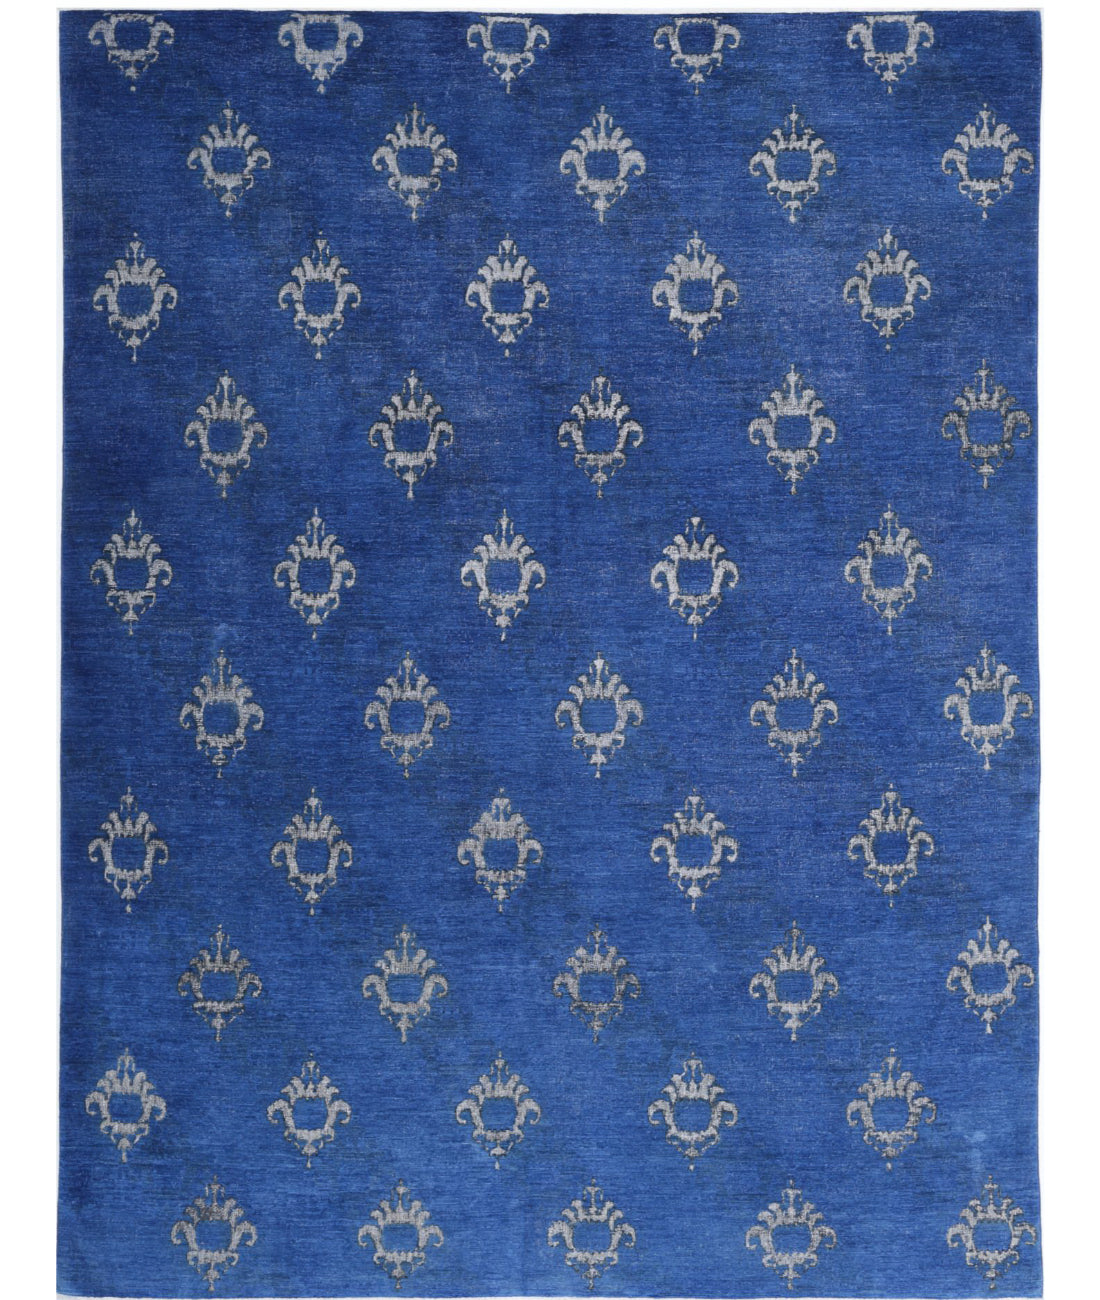 Hand Knotted Onyx Wool Rug - 8'9'' x 11'5'' 8'9'' x 11'5'' (263 X 343) / Blue / Ivory